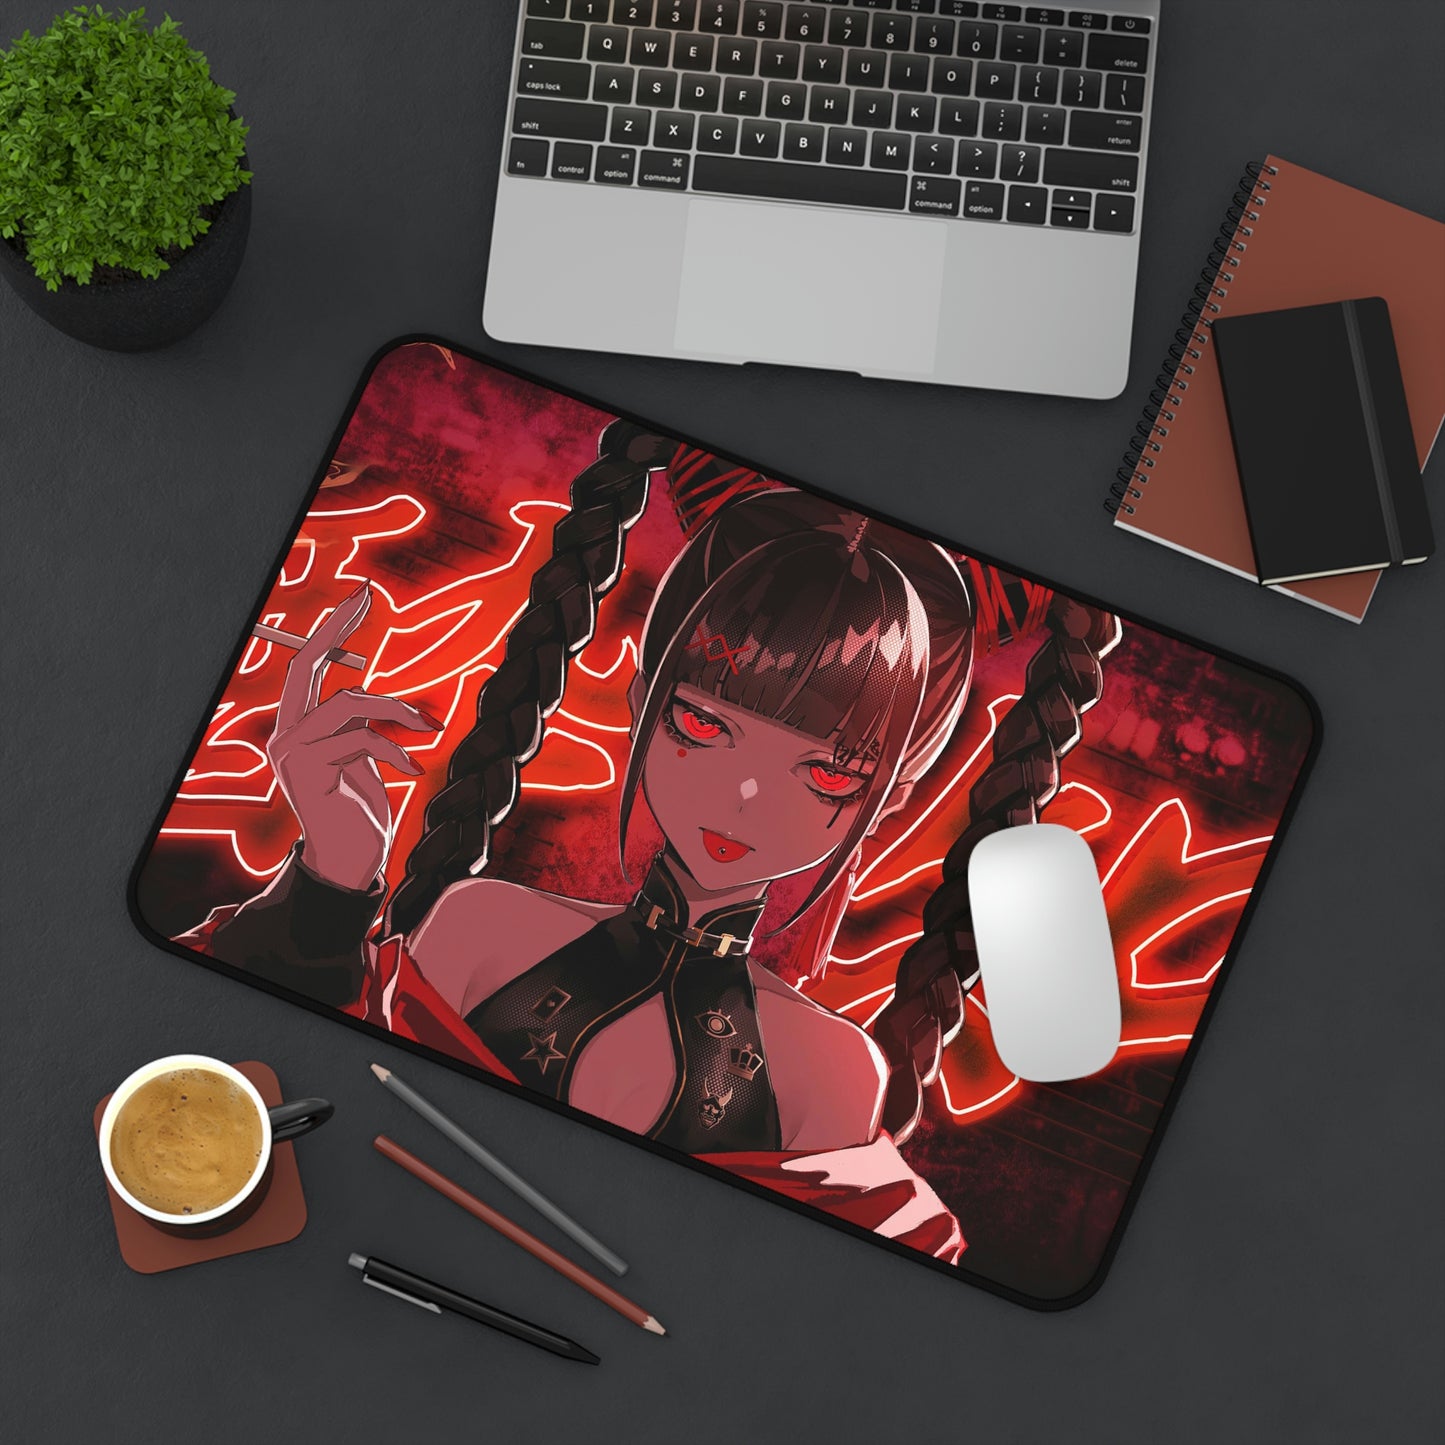 Red Eyes Girl Anime Mouse Pad